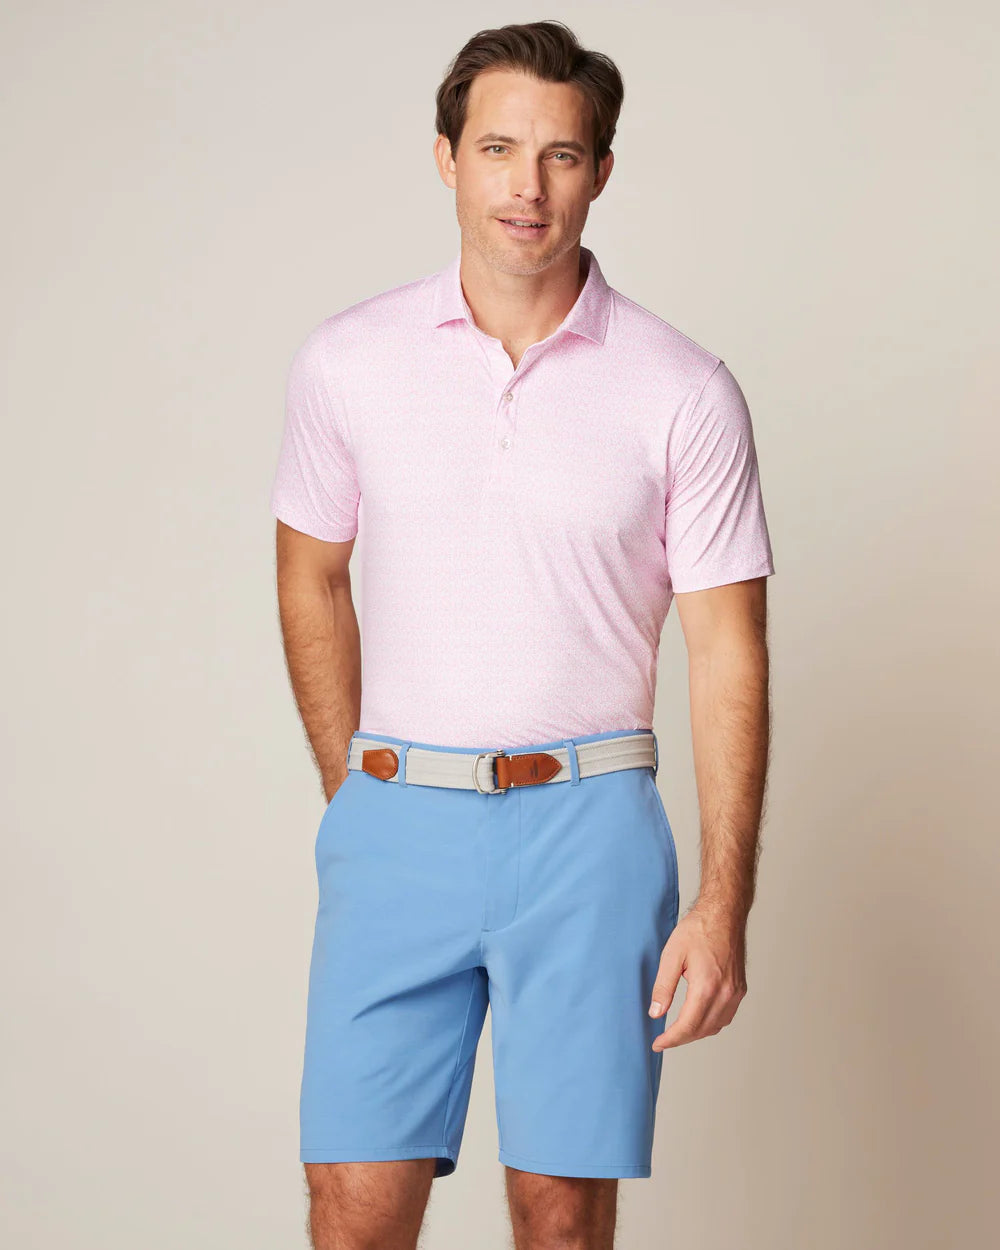 Made with our Featherweight Performance fabric, aka: the shirt you want on the hottest day of the year, this polo if perfect for the guy who likes to stay cool when the sun's at its peak.